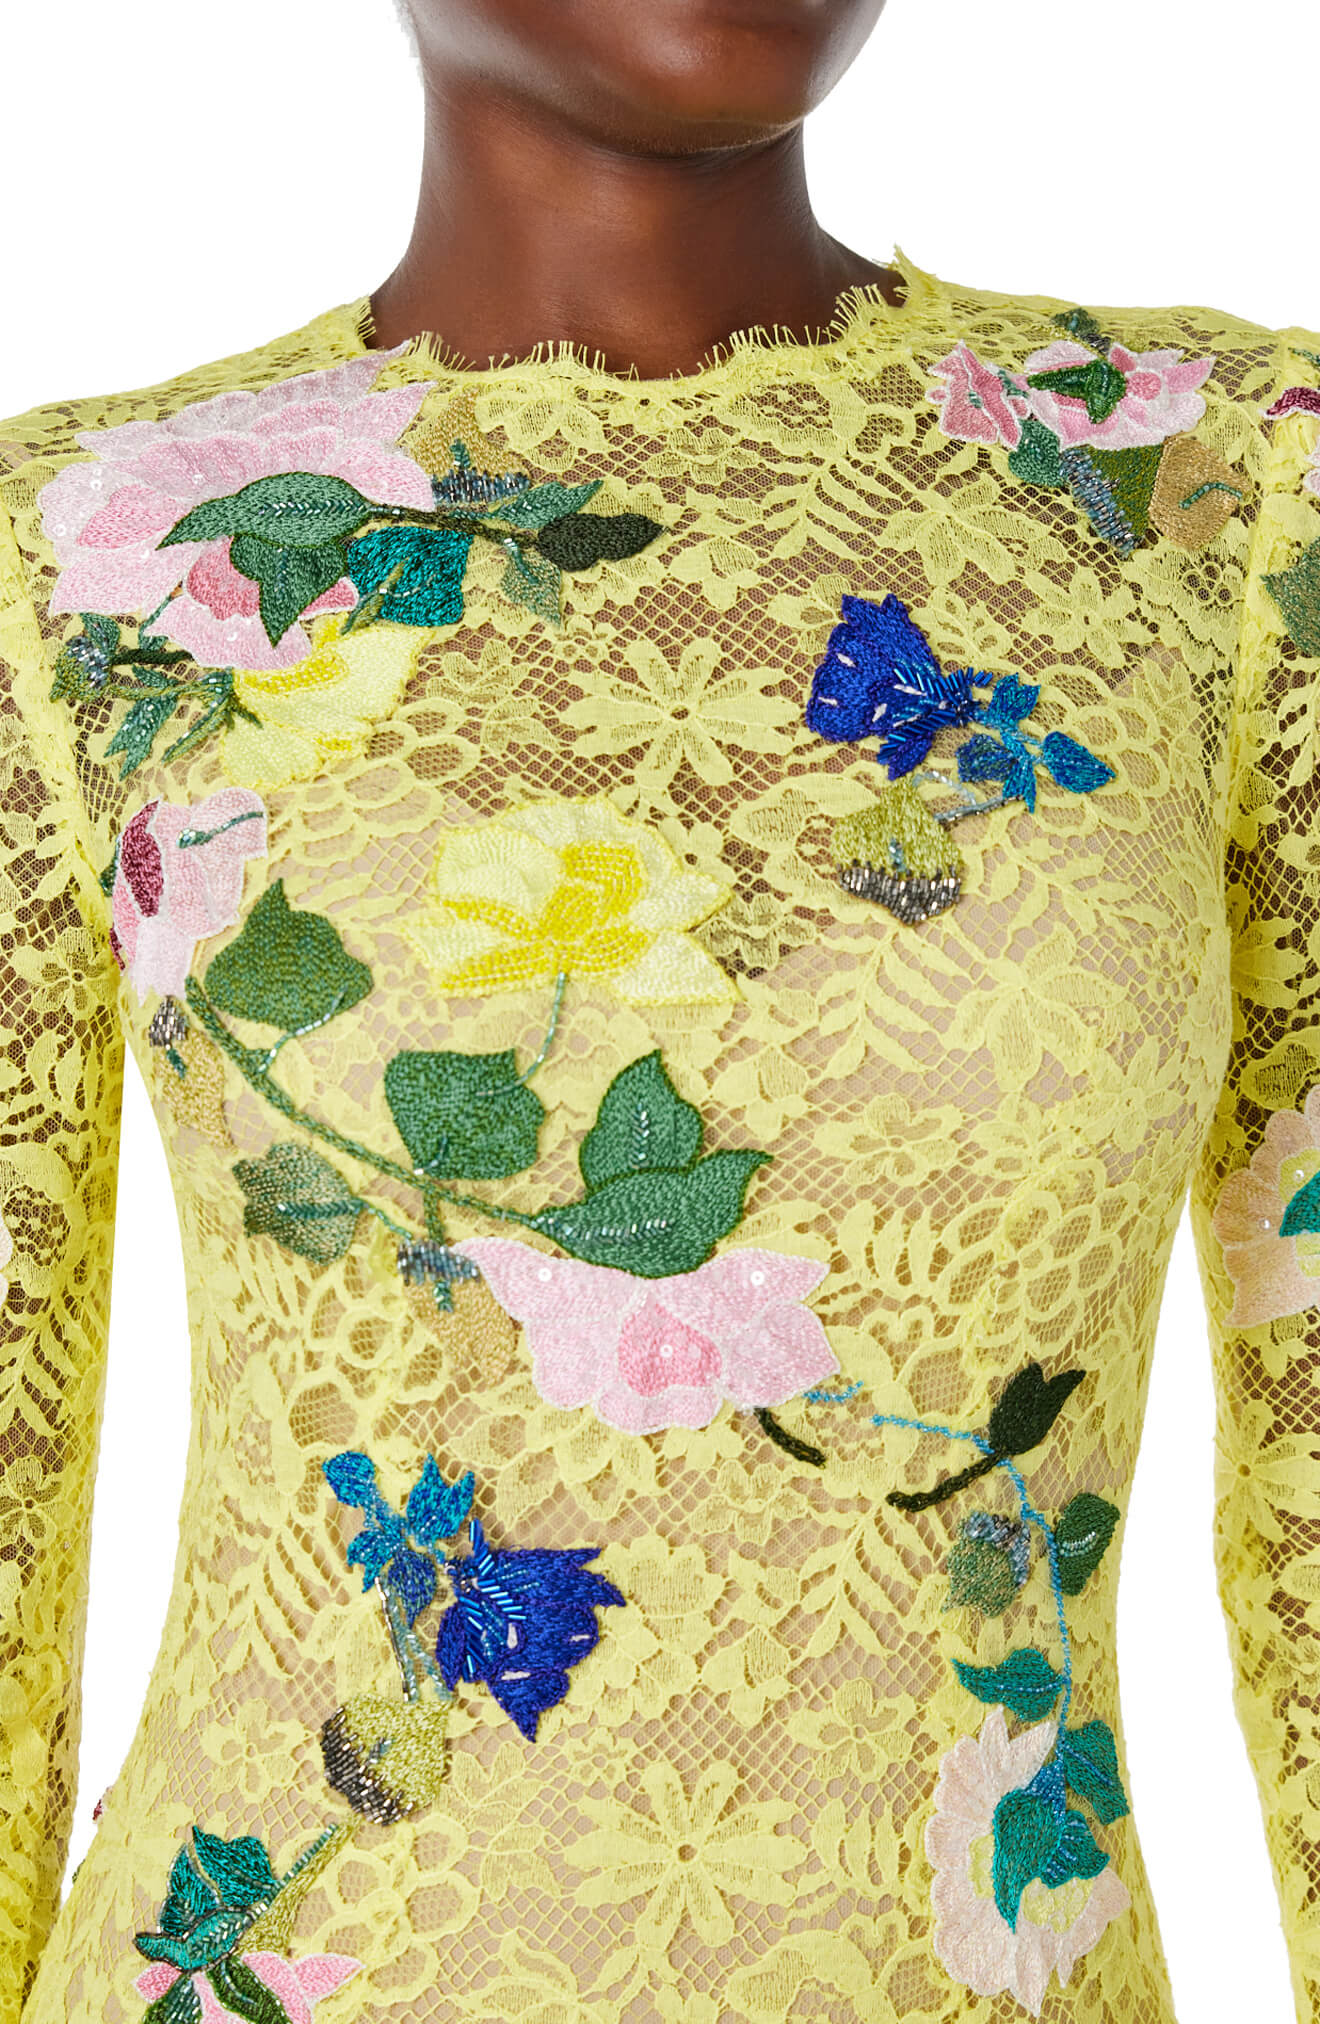 Monique Lhuillier Spring 2024 long sleeve yellow lace midi dress with floral embroidery - close up bodice.